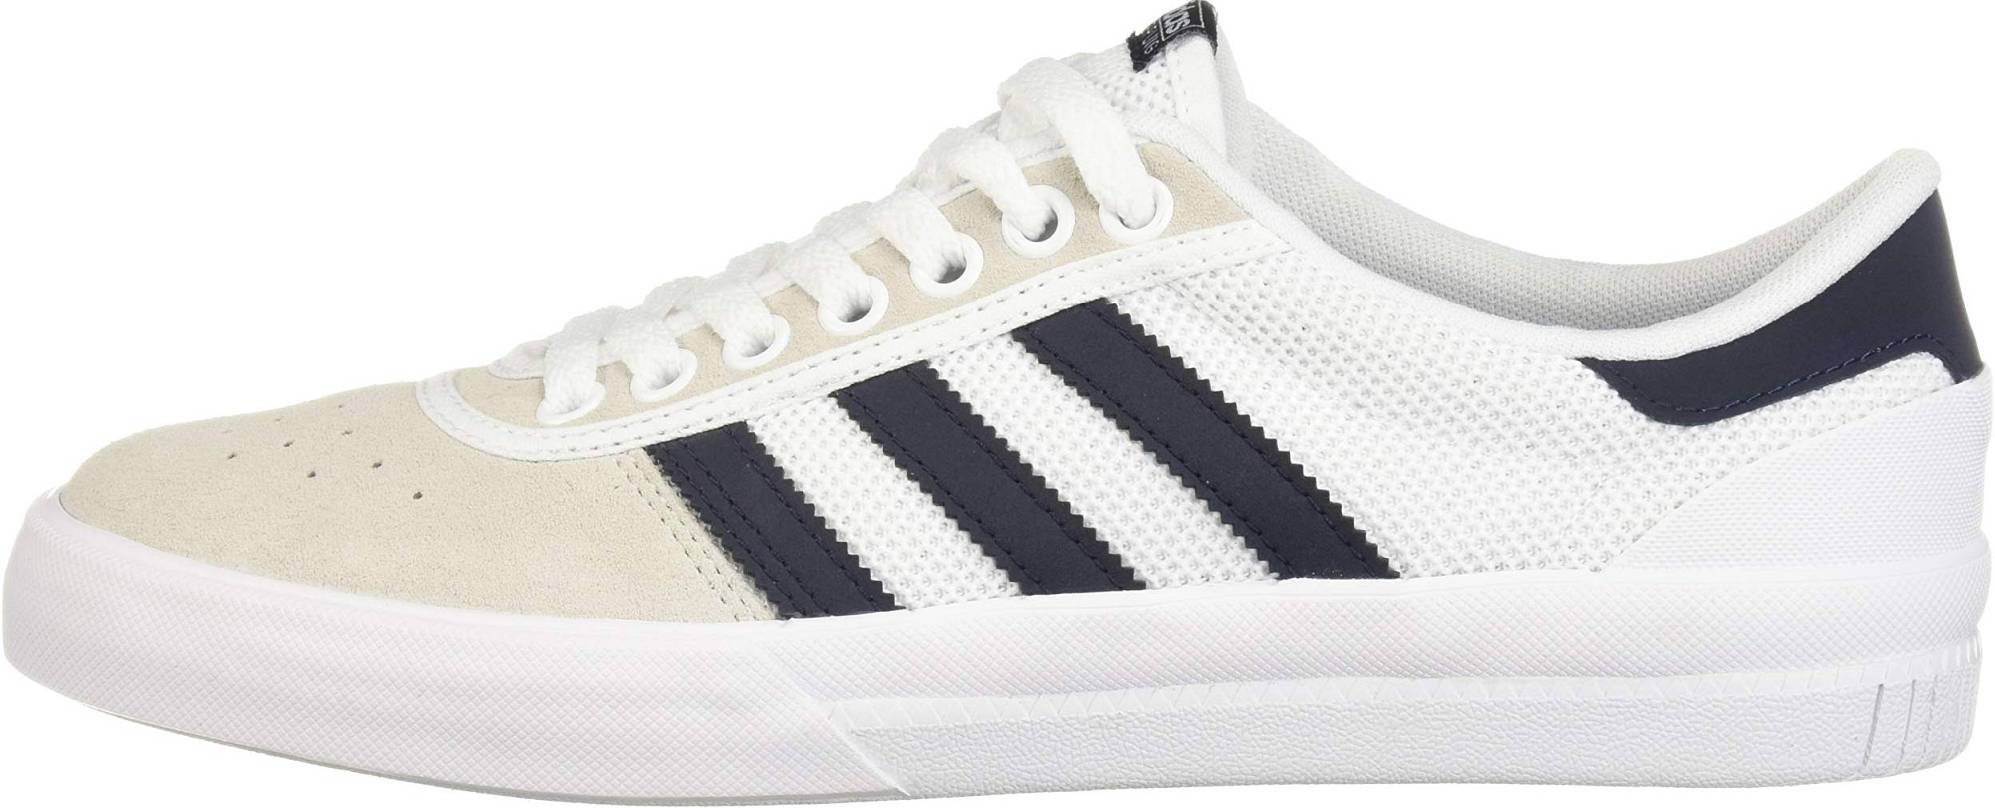 Adidas Lucas Premiere – Shoes Reviews & Reasons To Buy